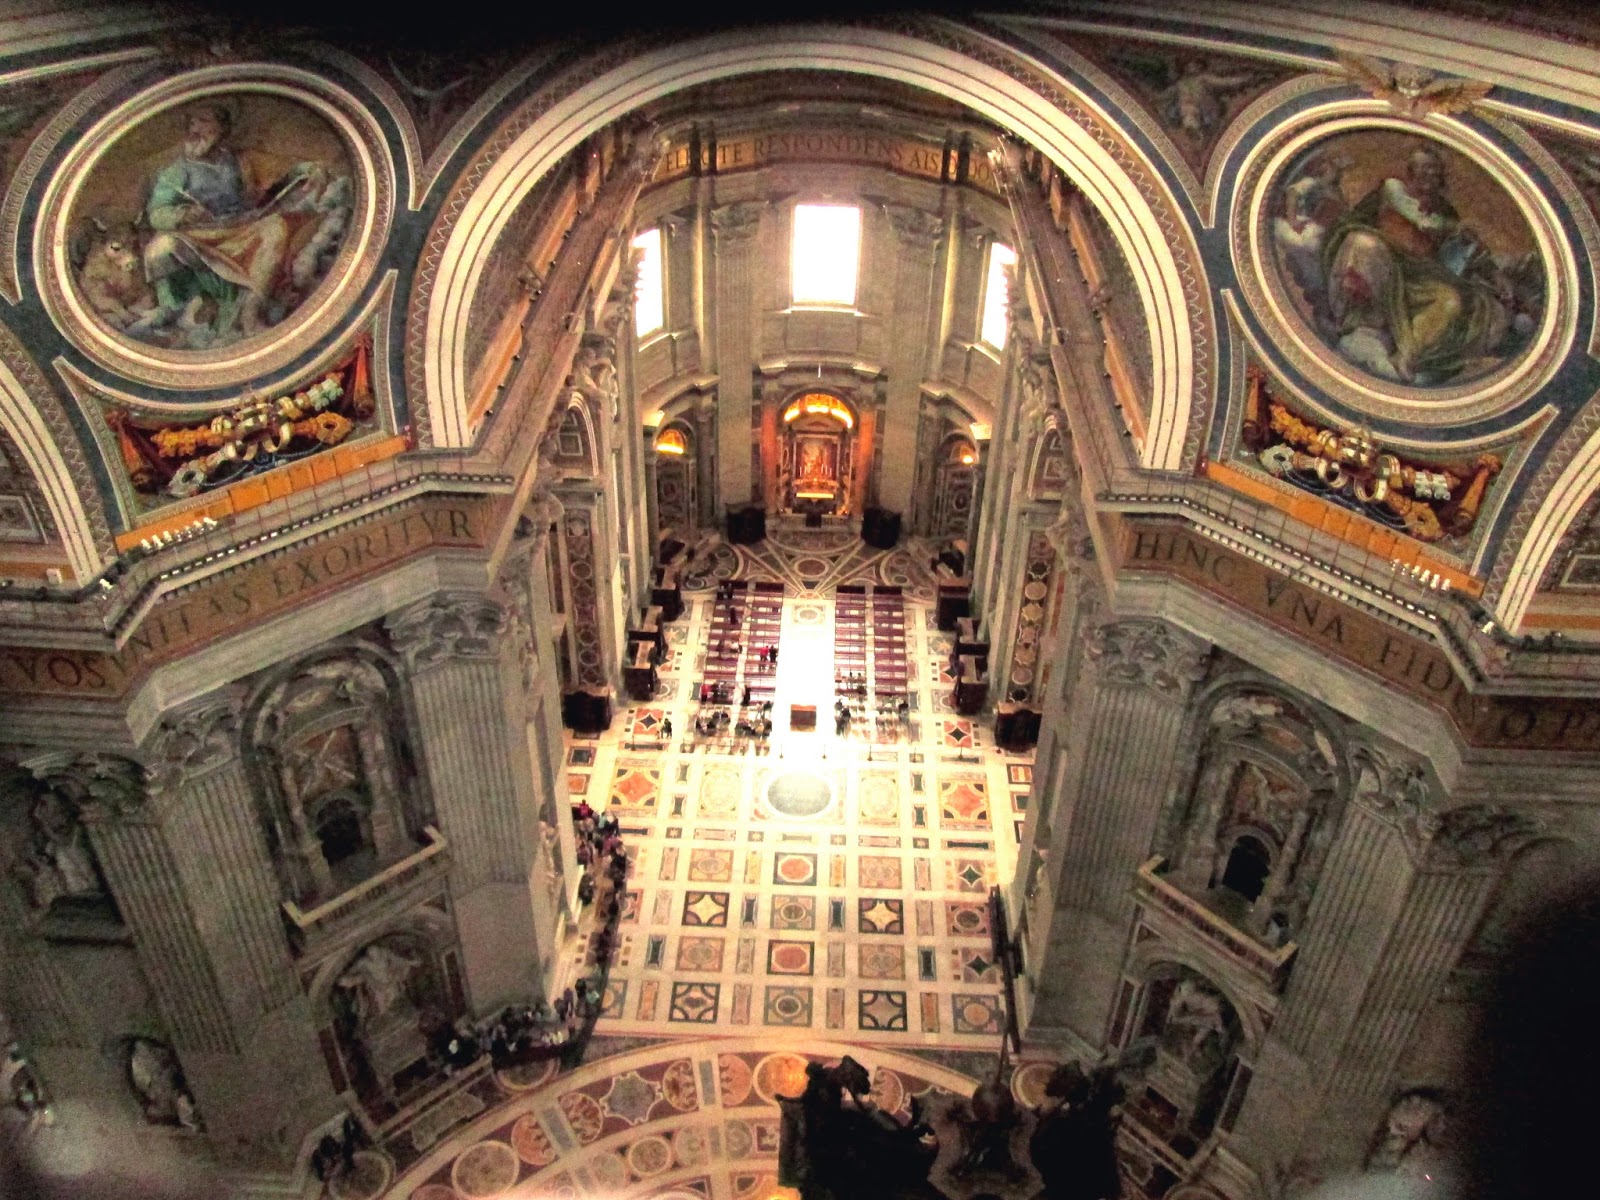 My Mission in Rome: A Visit to St. Peter's Basilica